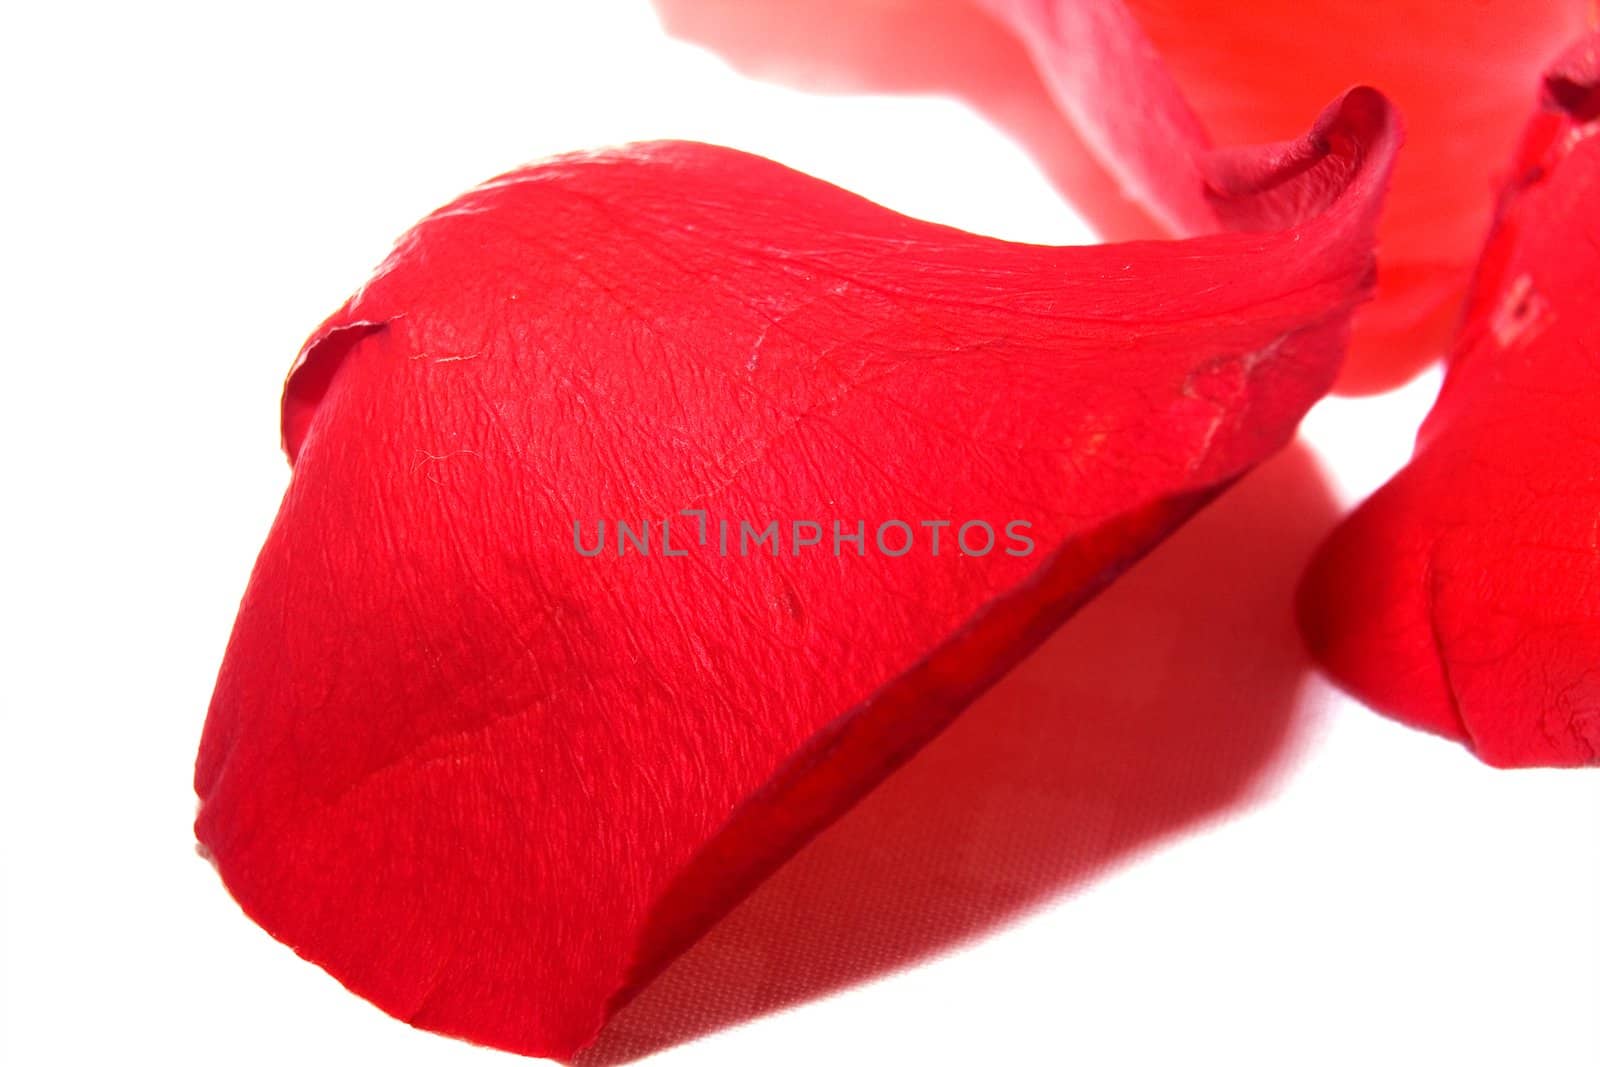 Petals of a red rose on a white background